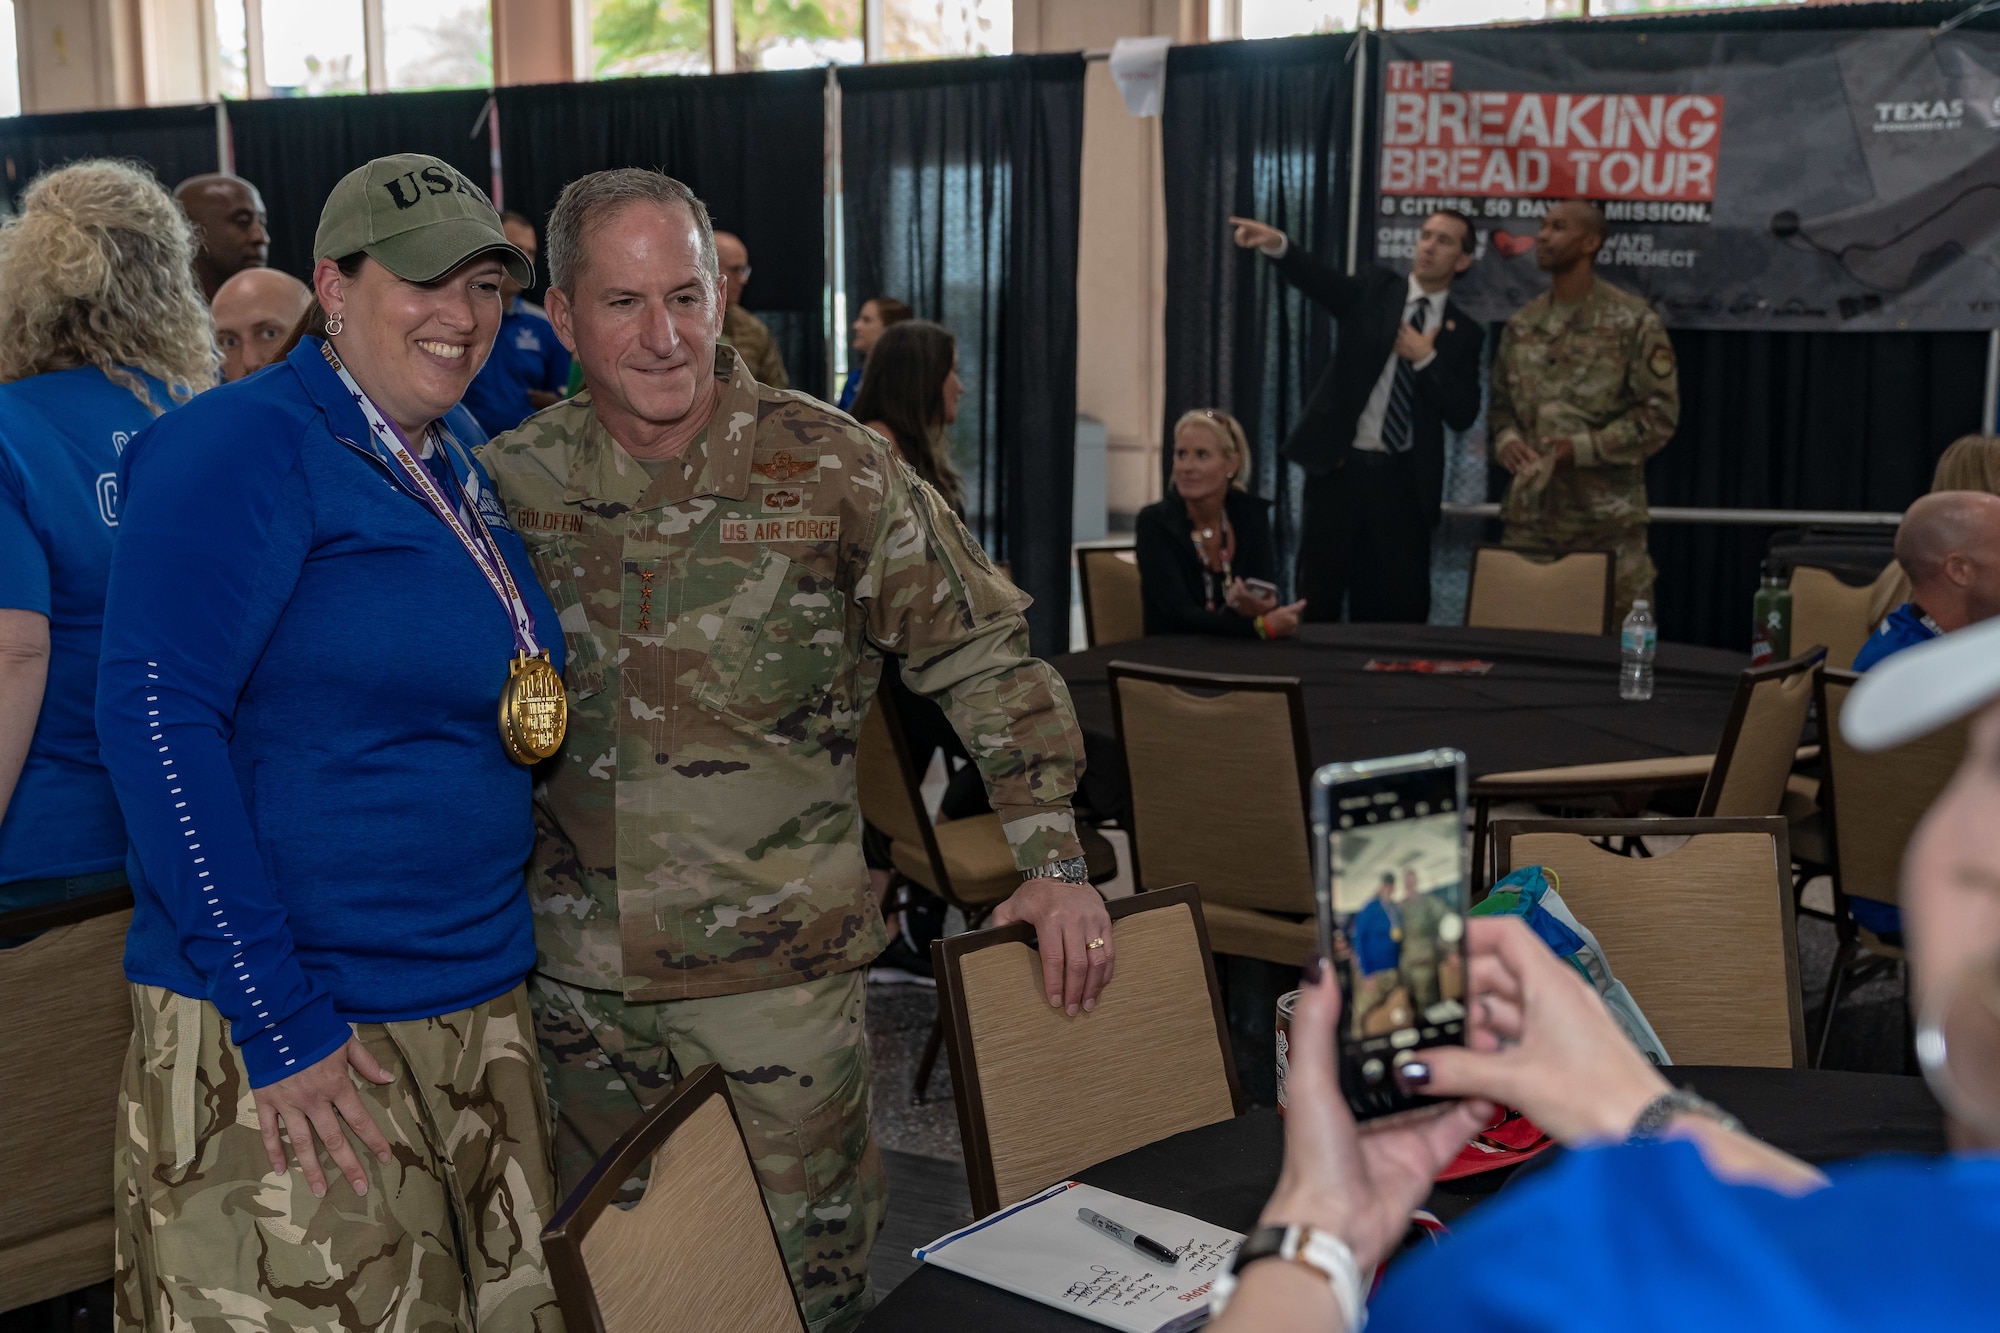 Air Force Chief of Staff Gen. David L. Goldfein and Tech Sgt. Roann R. Leatz, Team Air Force athlete, pose for a photo at the 2019 Department of Defense Warrior Games at Tampa, Fla, June 28, 2019. Warrior Games athletes have overcome significant physical and psychological challenges, not always visible to others and have demonstrated that life continues after becoming wounded, ill or injured. (U.S. Air Force photo by Tech Sgt. Lionel Castellano)